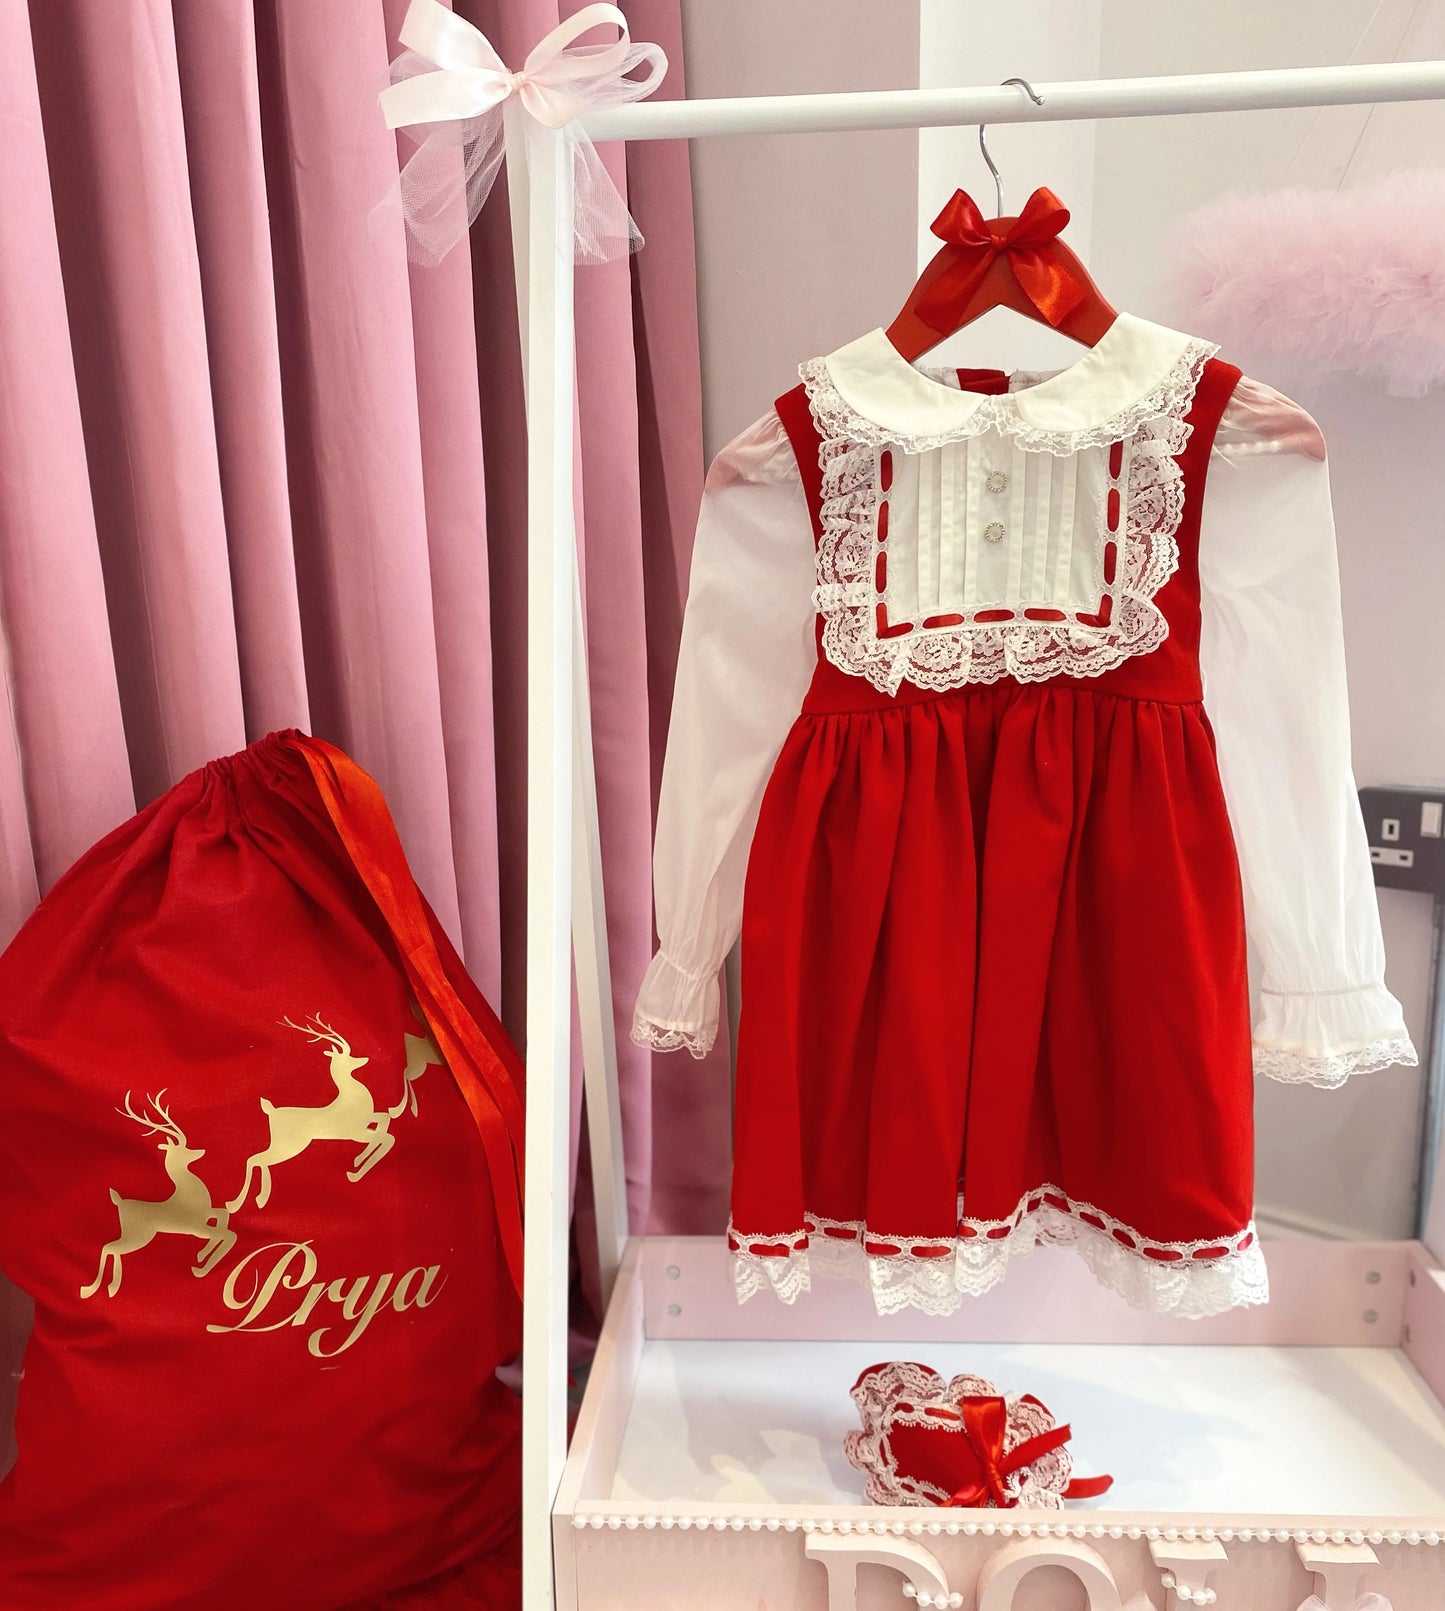 BLANCHETTE RED PINAFORE DRESS & HEADBAND 4 YEARS READY TO SHIP